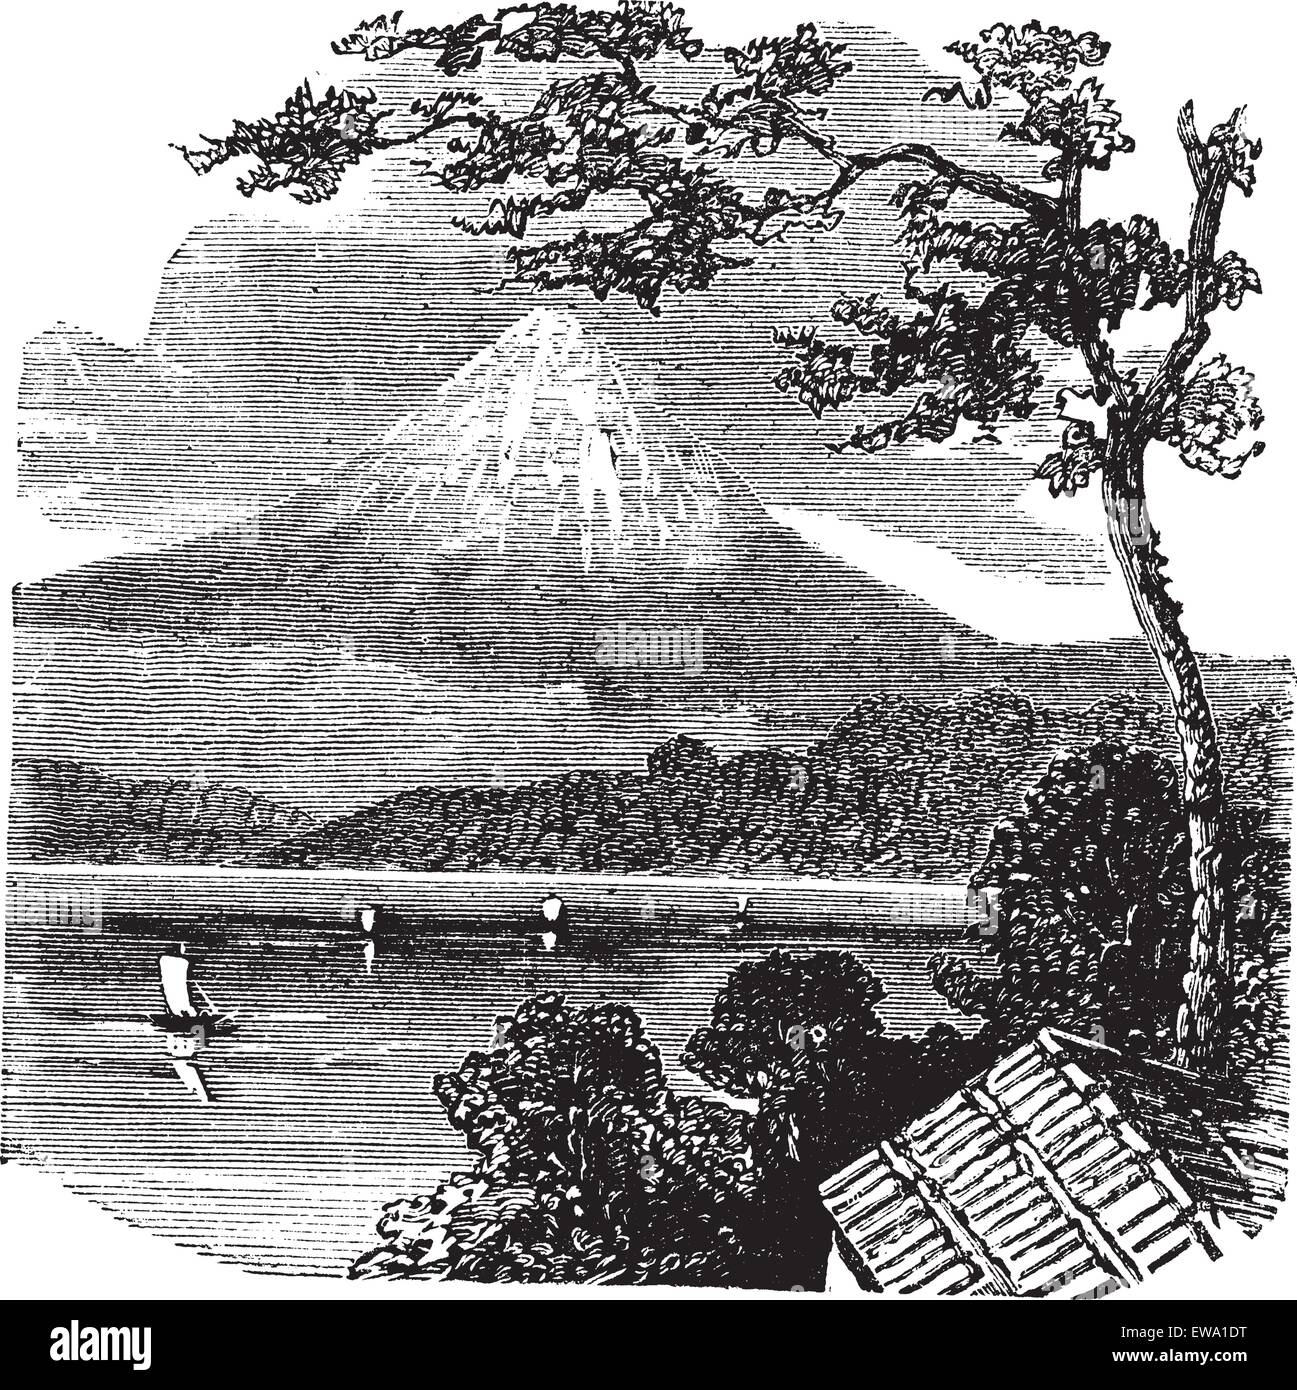 Mount Fuji in Japan, during the 1890s, vintage engraving. Old engraved illustration of Mount Fuji, with Lake Kawaguchi and trees in front. Stock Vector